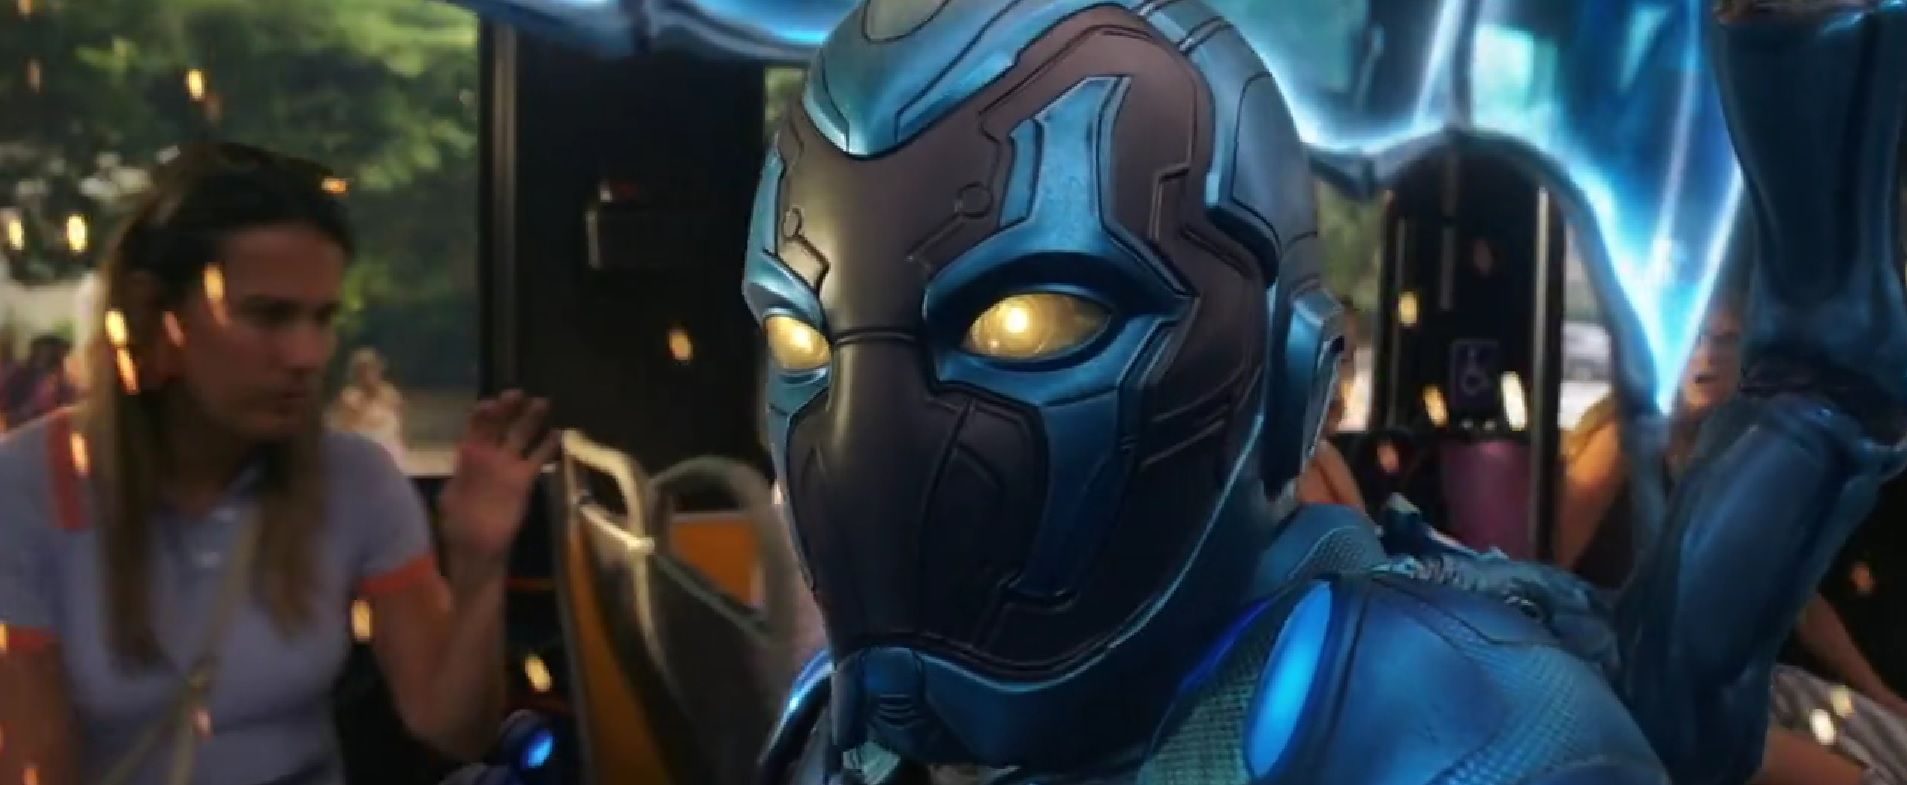 Blue Beetle release date, cast, trailer and more